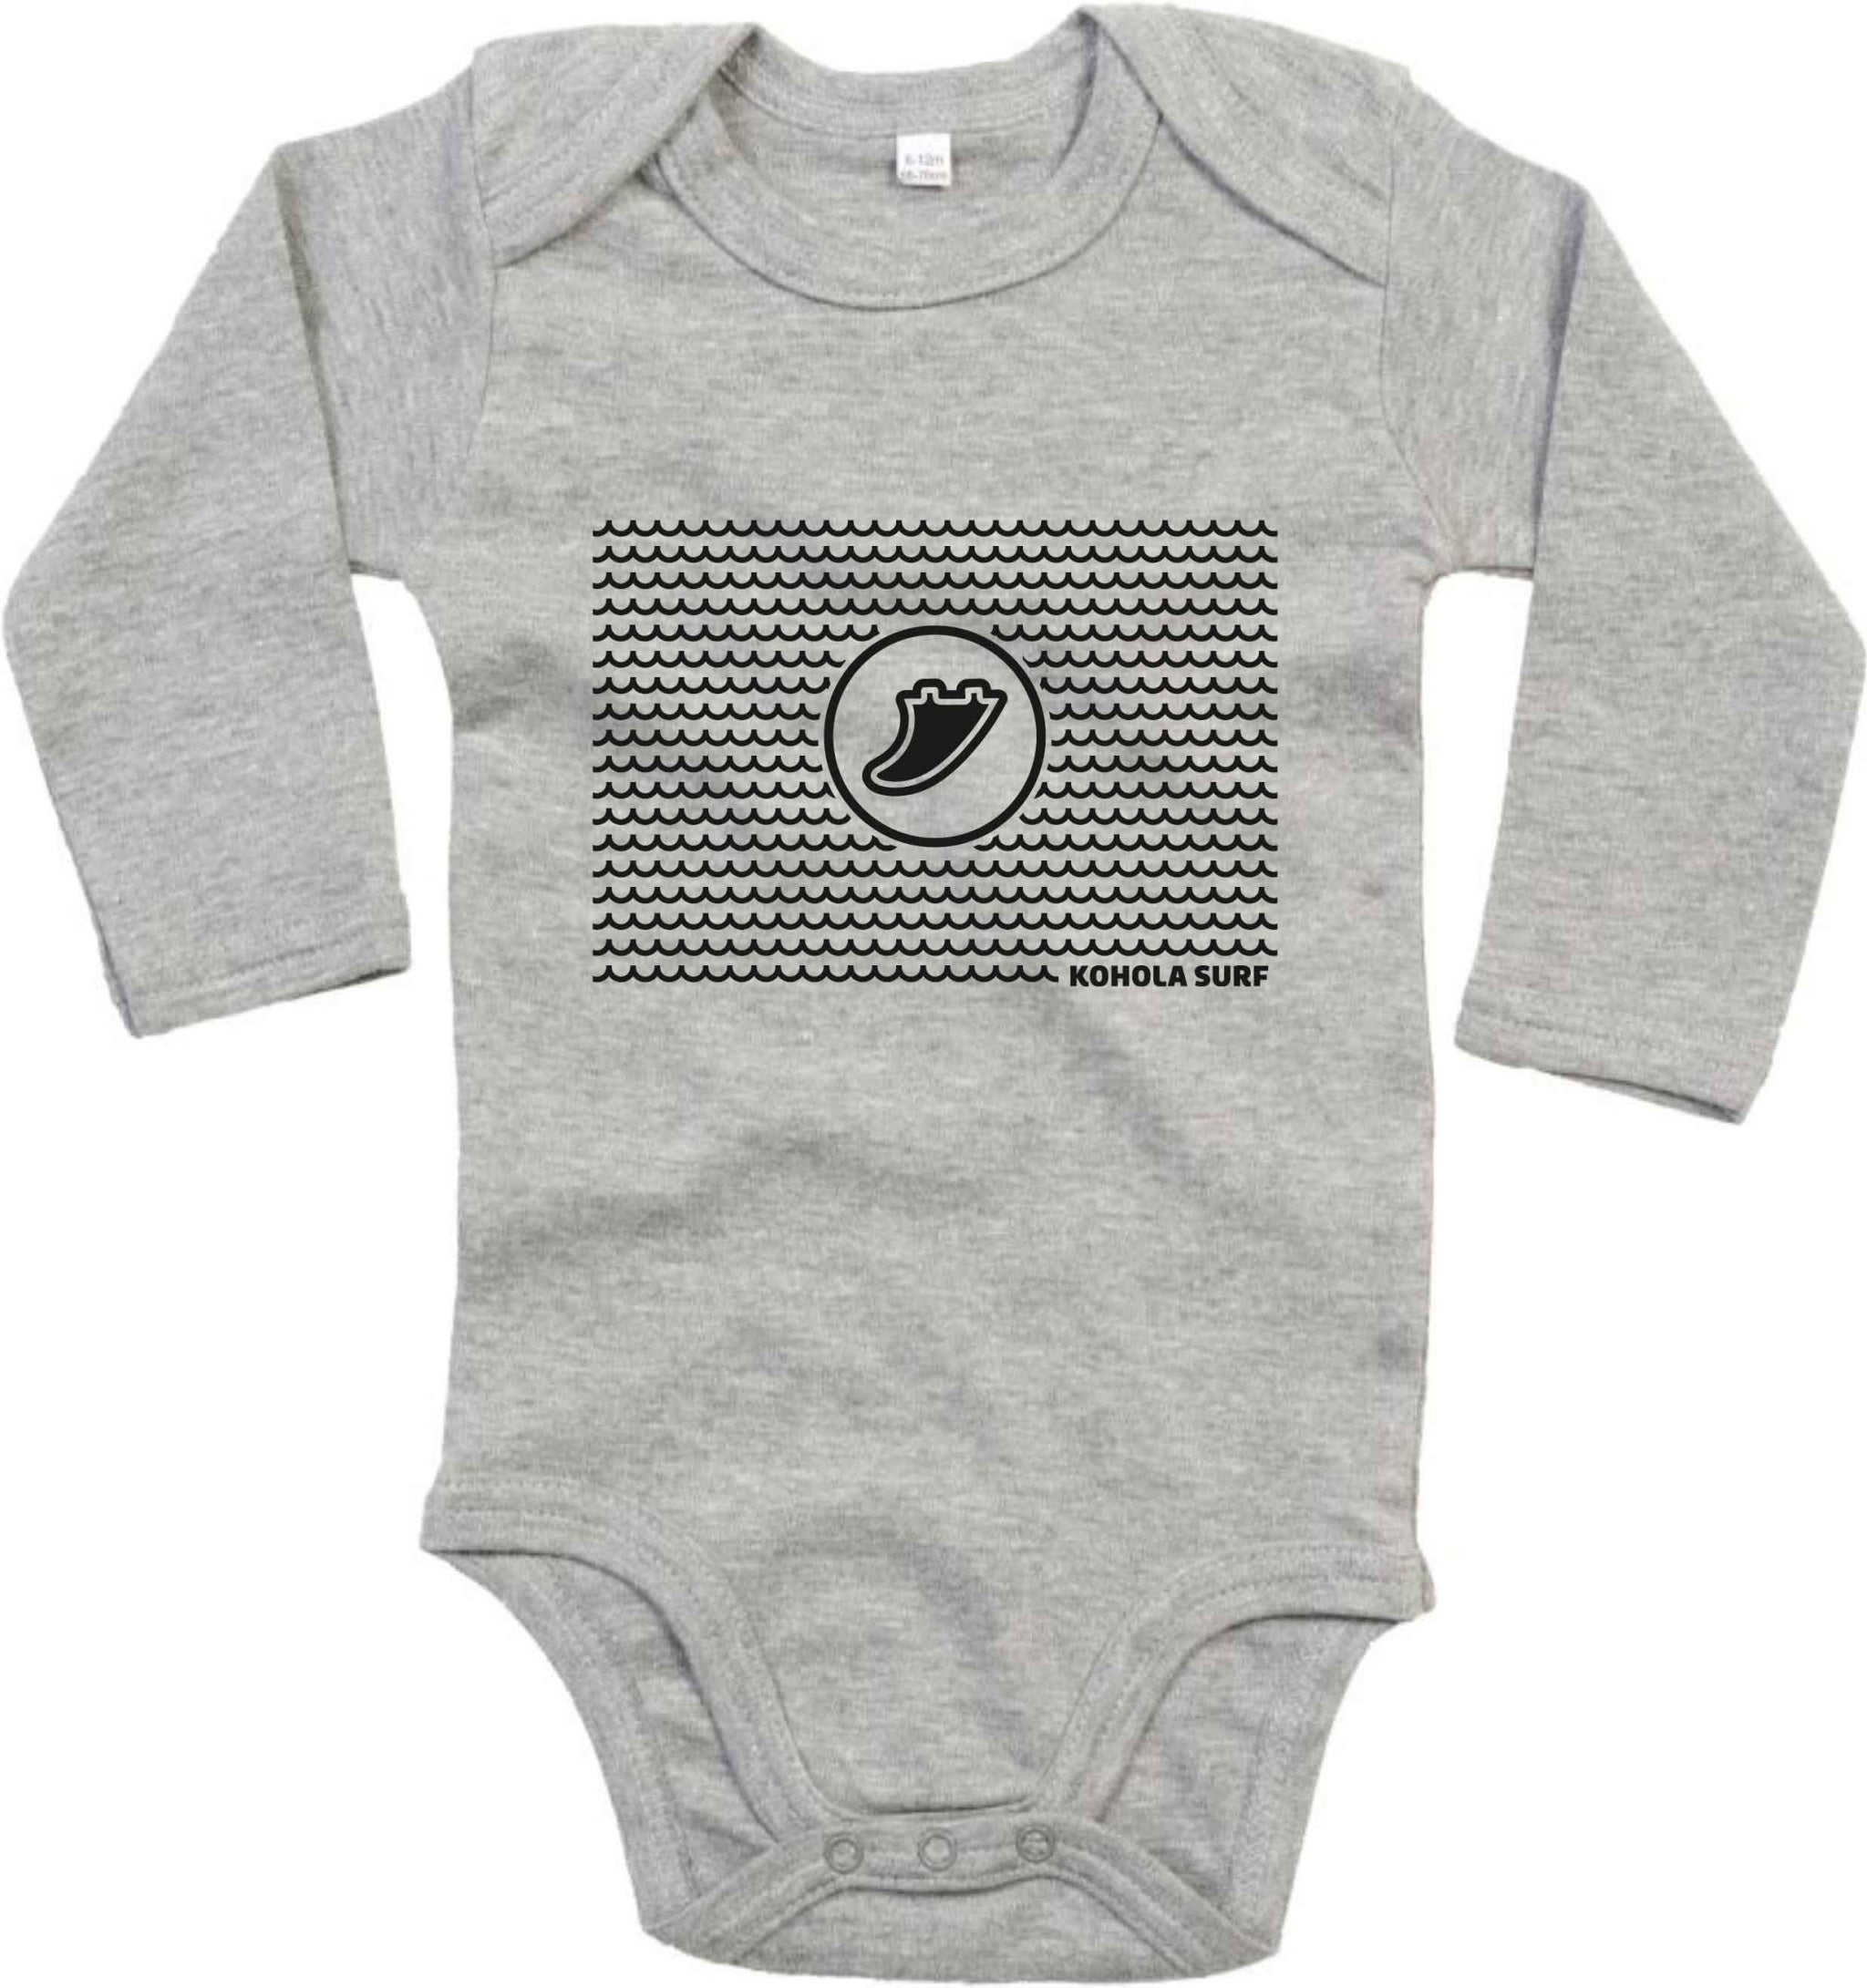 Endless Wave Baby Long-Sleeved Body